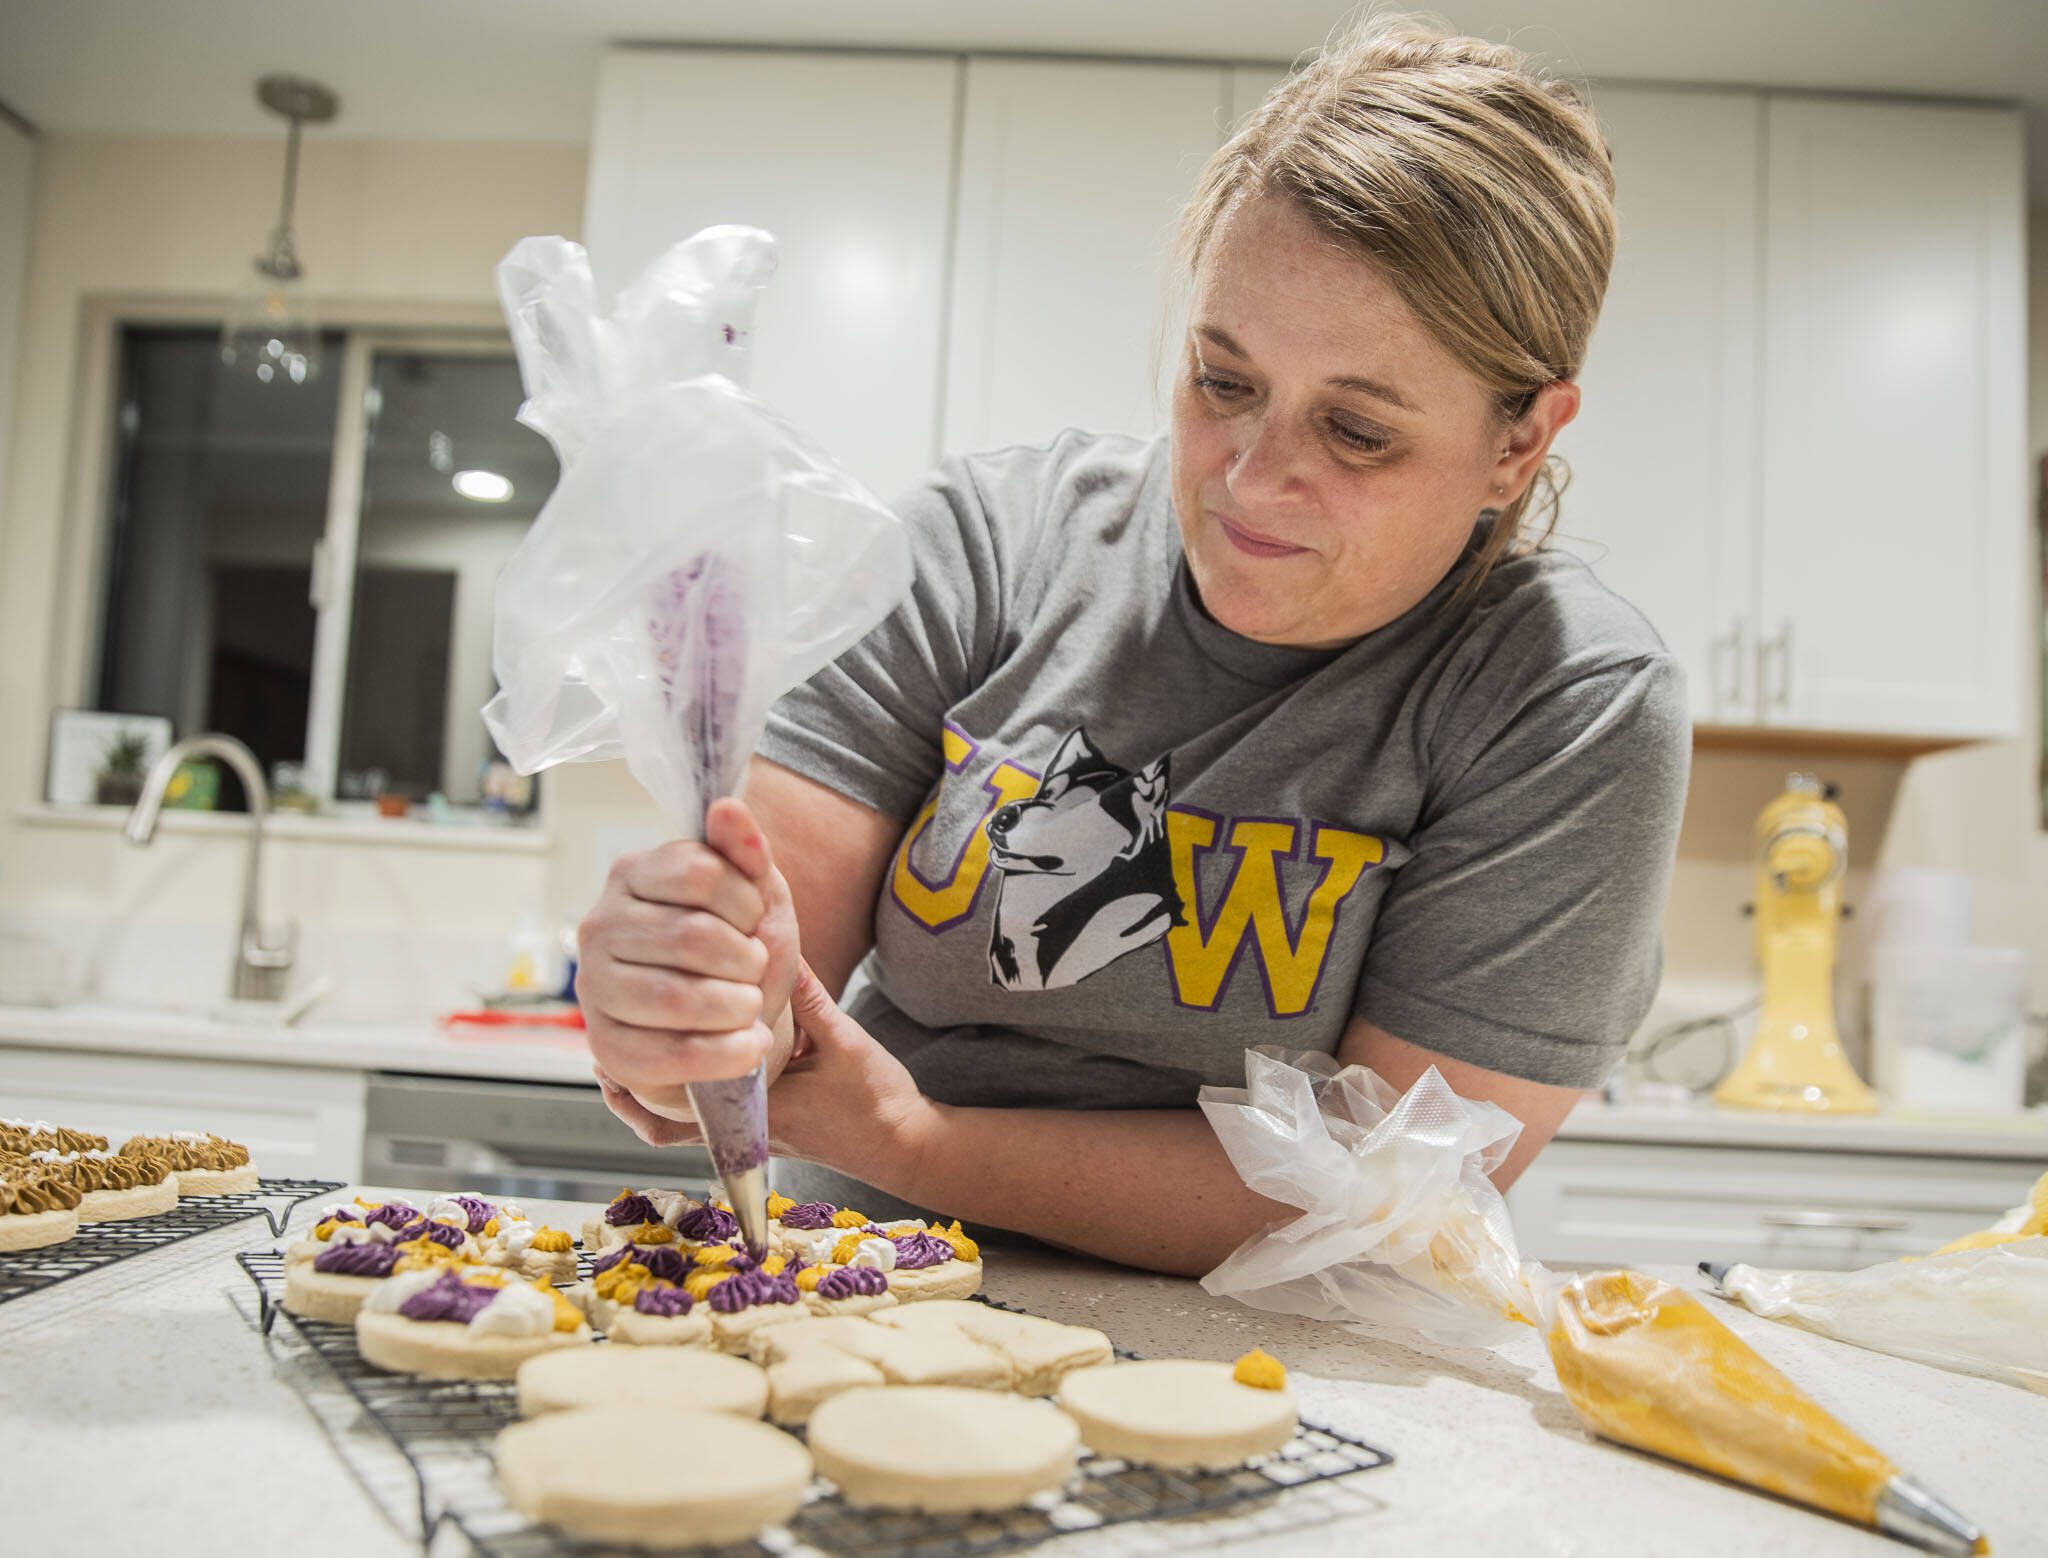 Andrea Ancich frosts University of Washington themed cookies at her Marysville home for her flight to the College Football Playoff National Championship in Texas. (Olivia Vanni / The Herald)